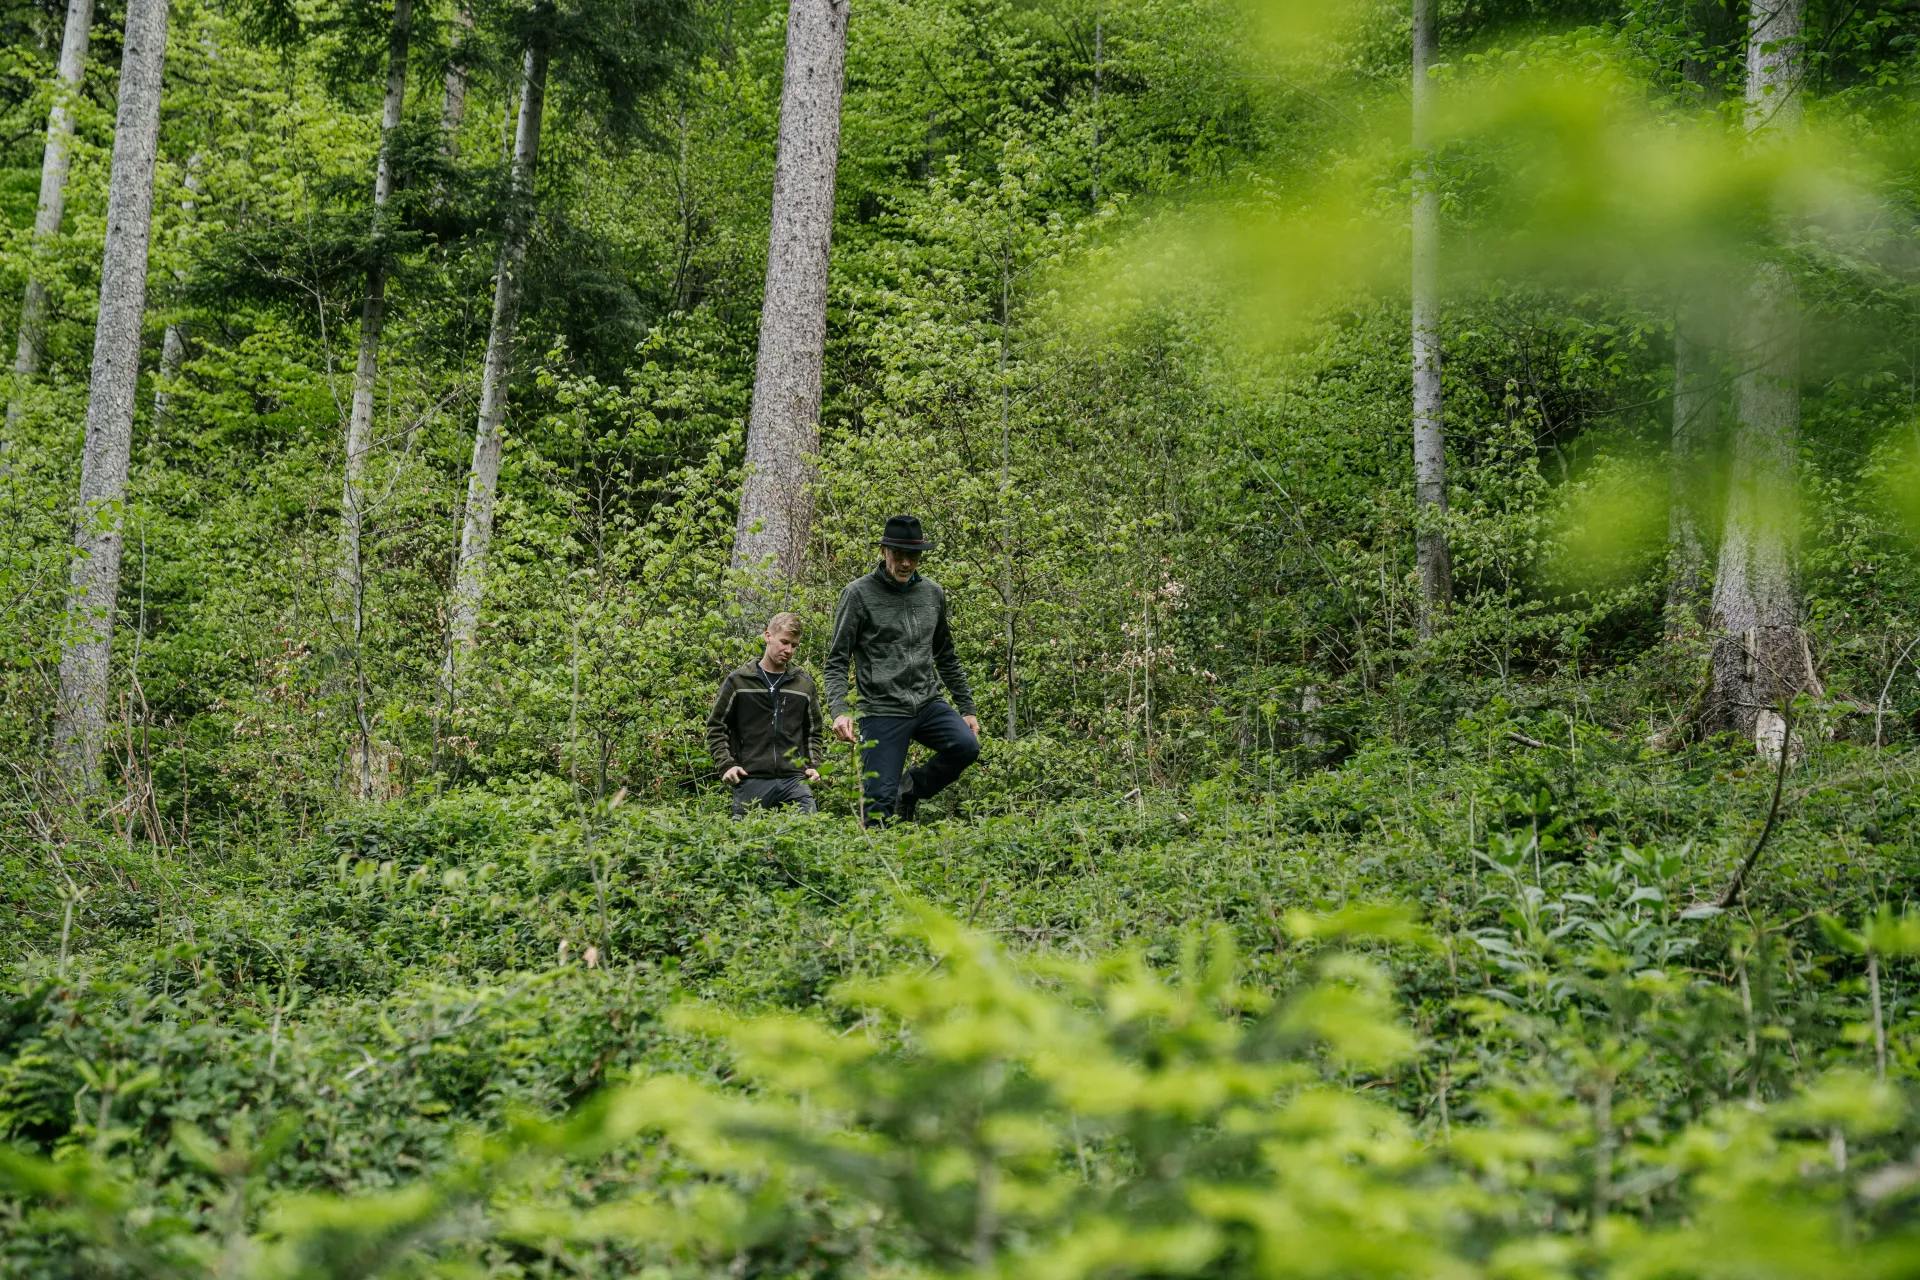 Forests of the FBG Jagdberg, two man walking through the forest in the background